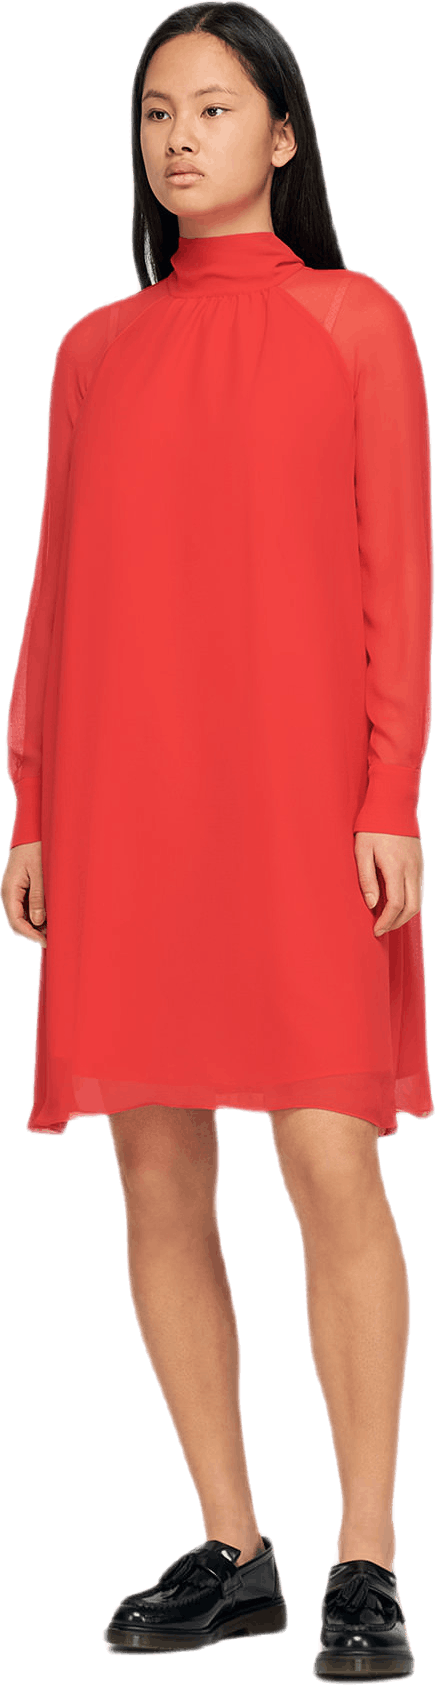 Flowing Dress Red